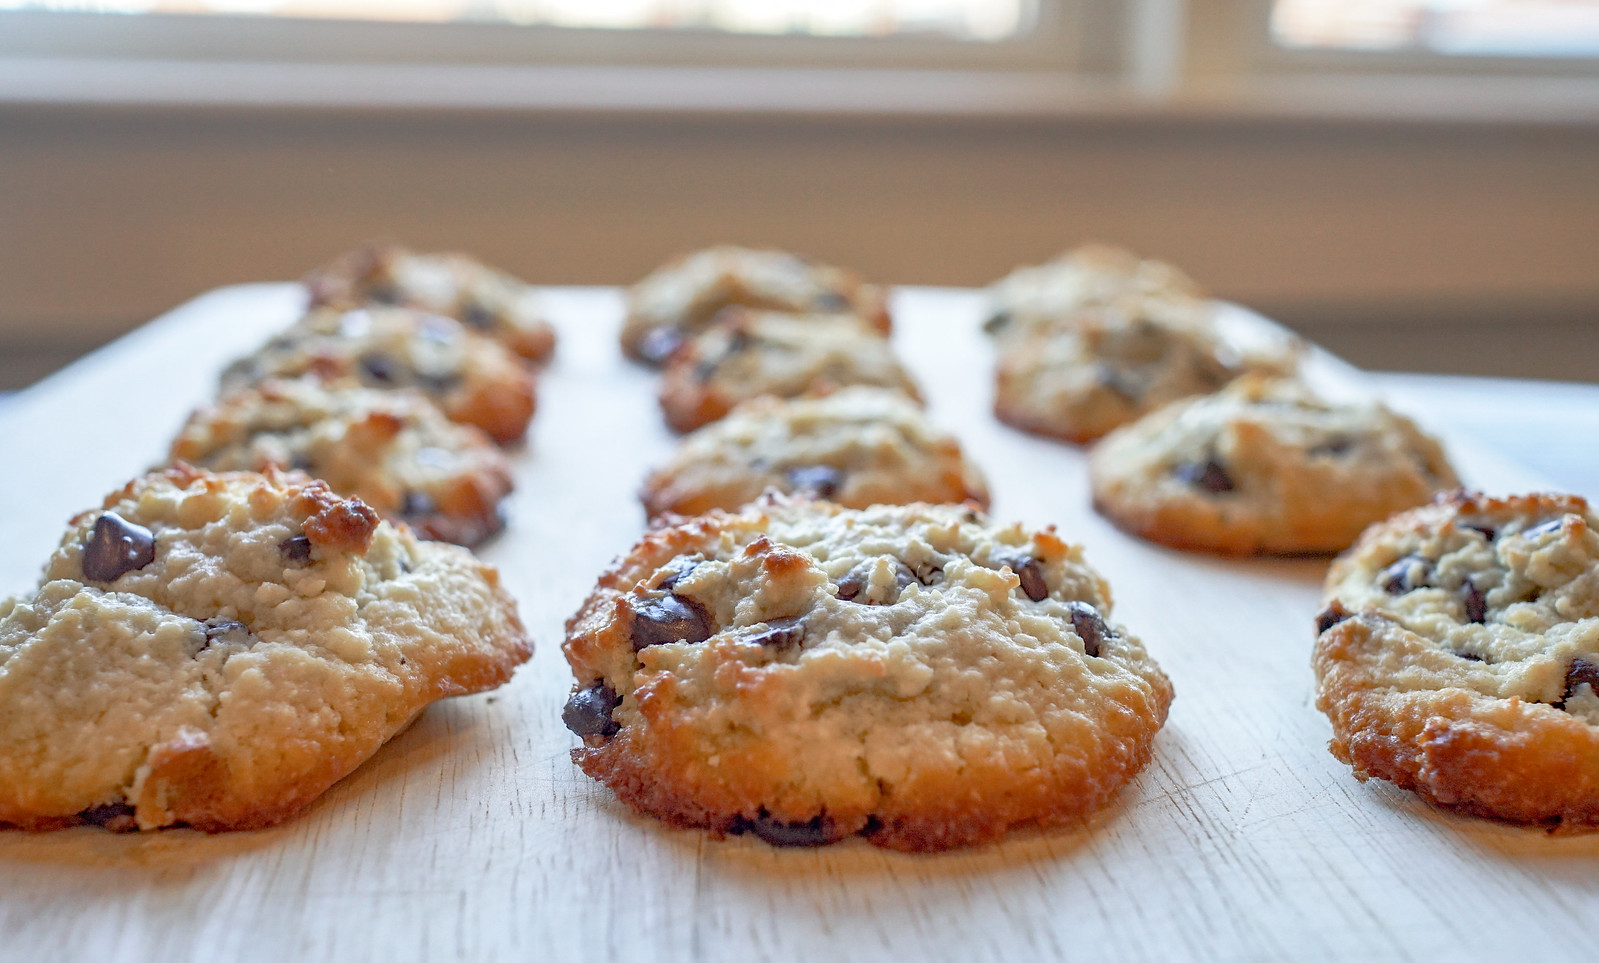 Low Carbohydrate, Healthy Fat Chocolate Chip Cookies